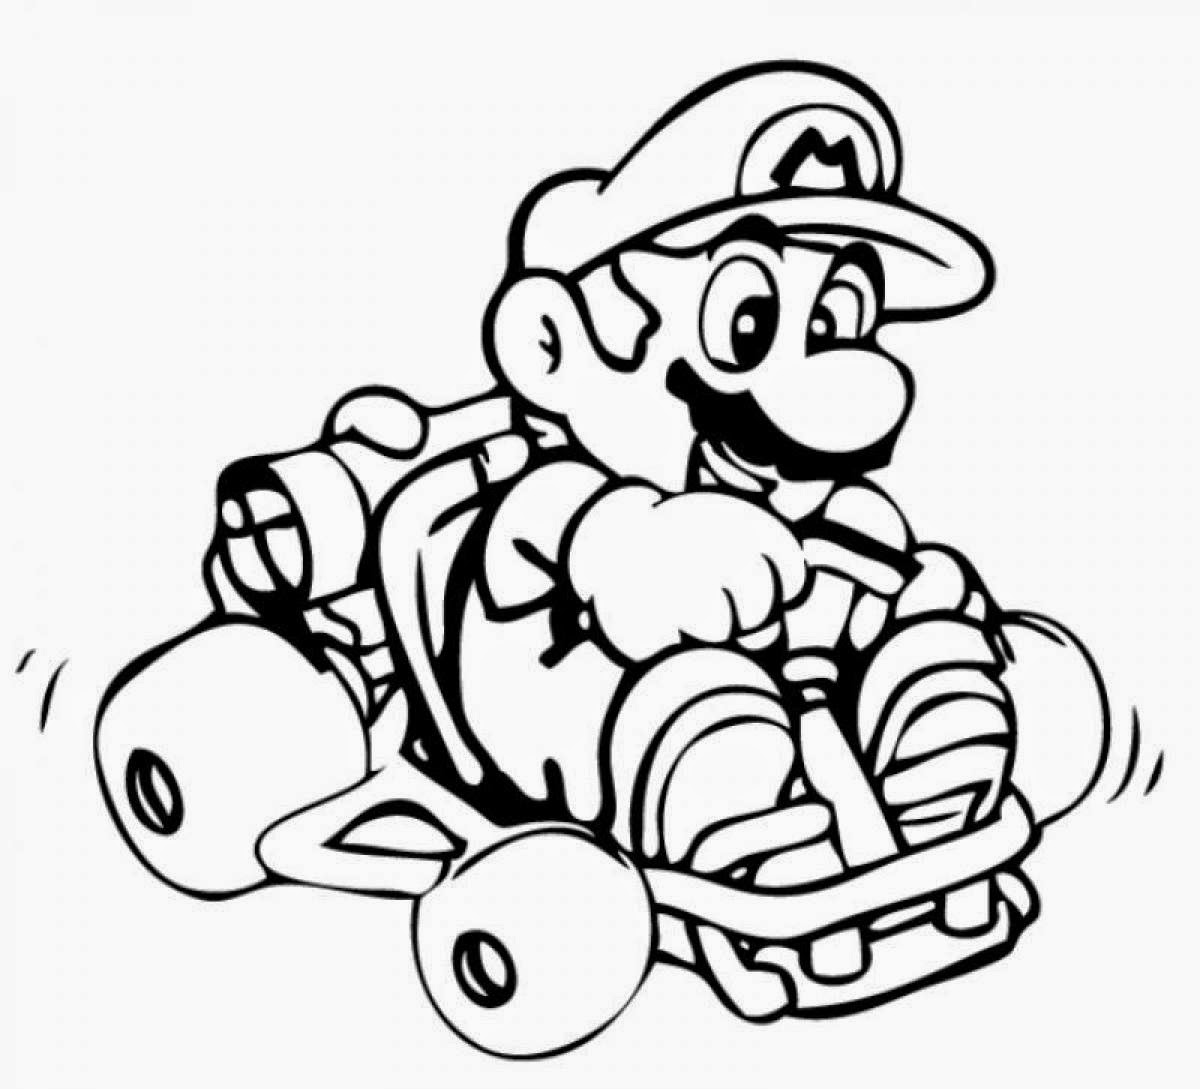 Download Coloring Pages: Mario Coloring Pages Free and Printable